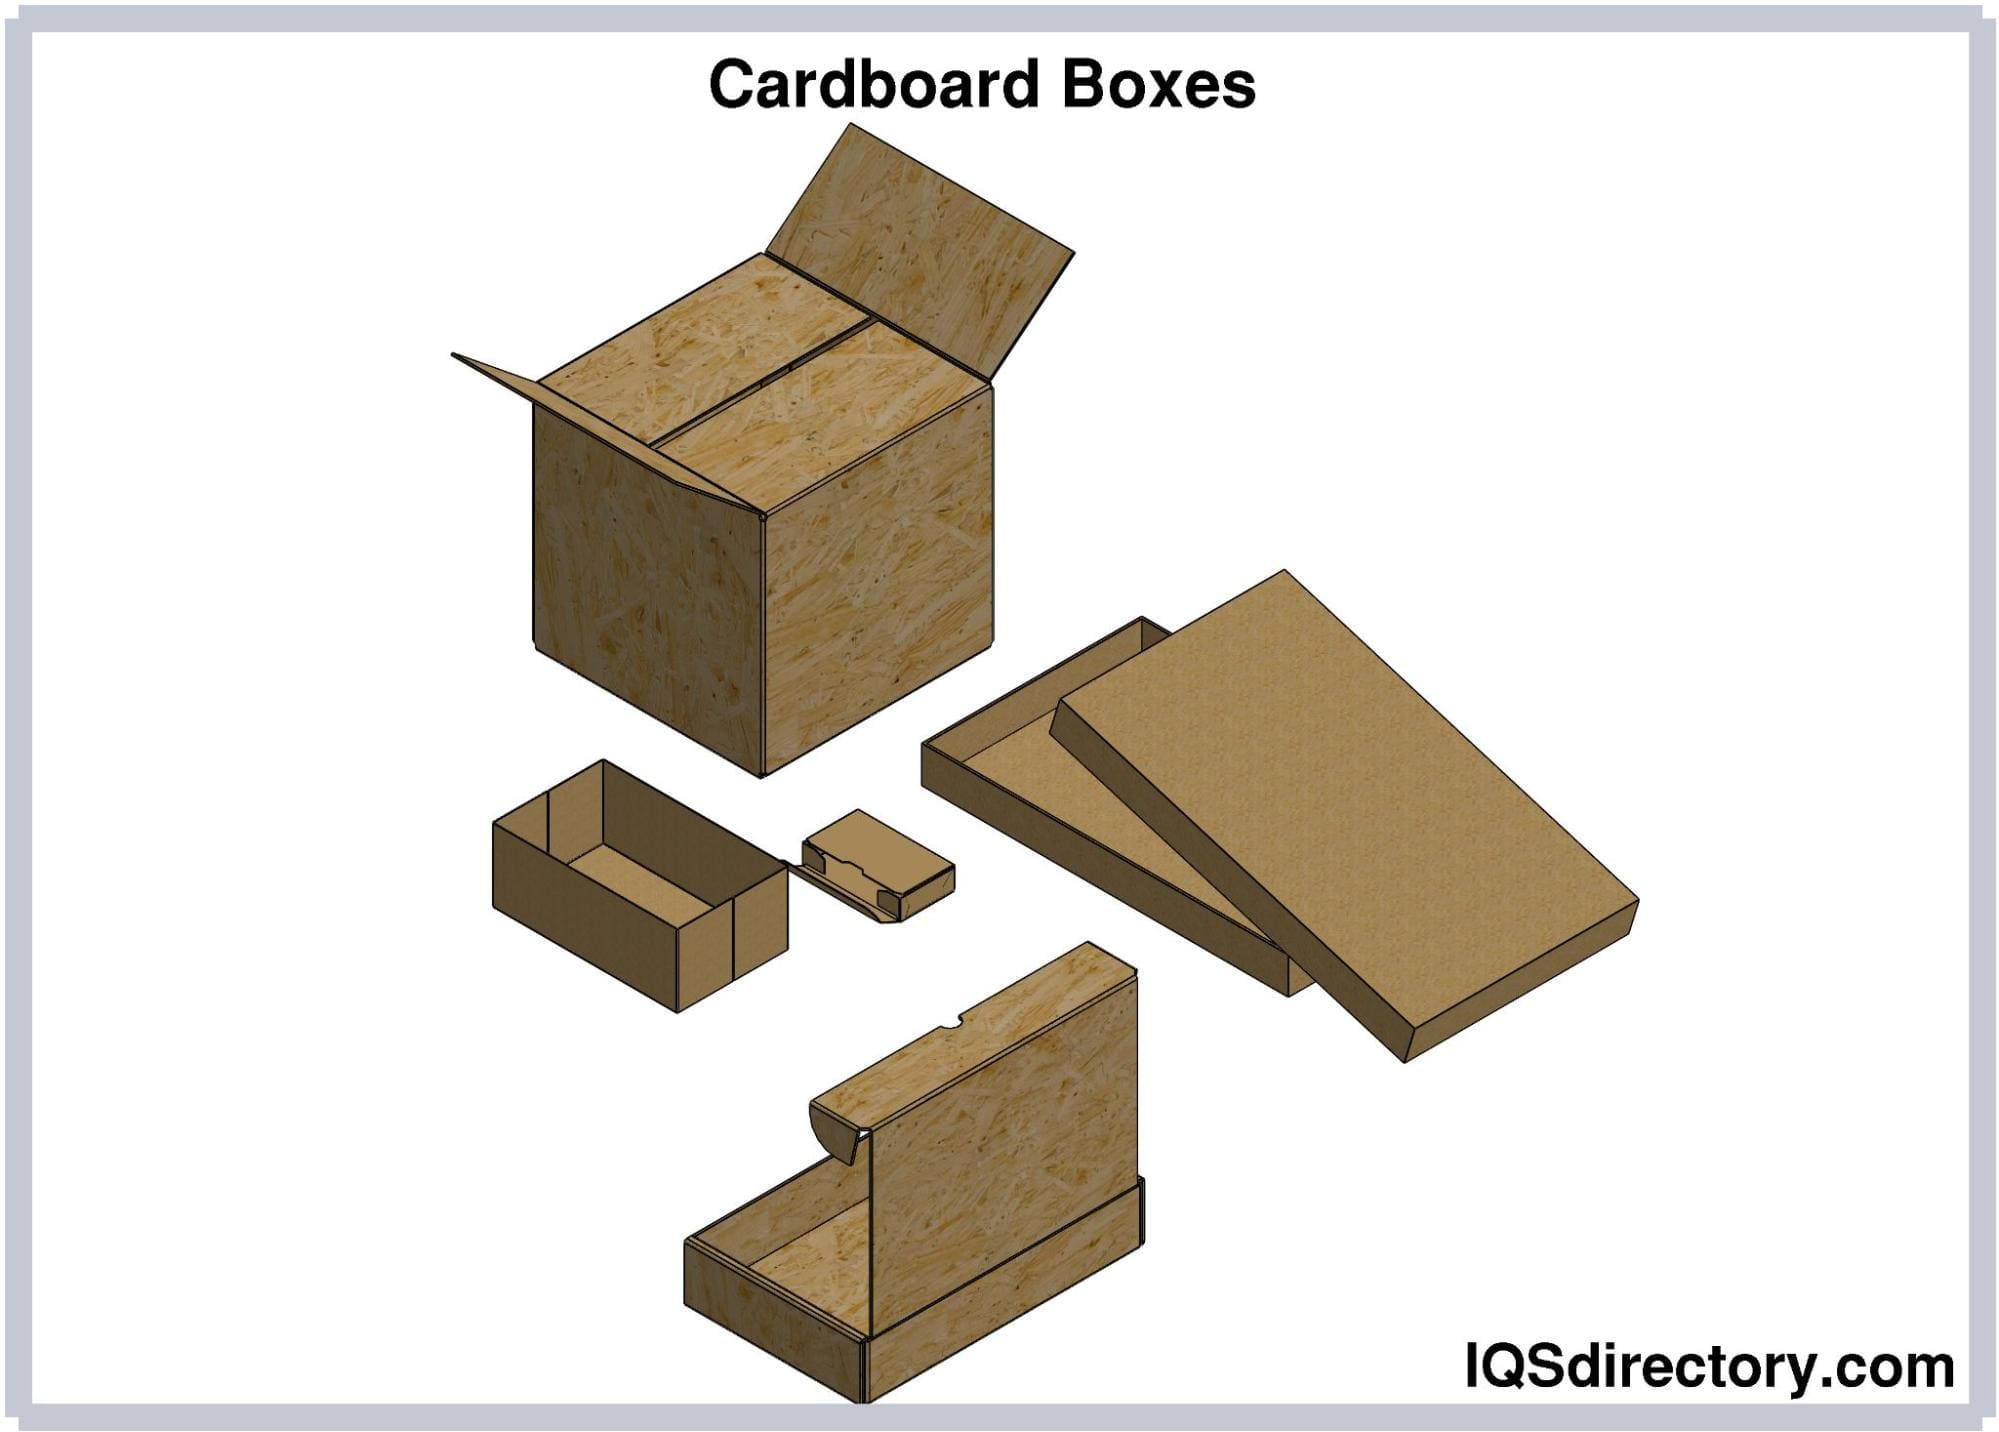 Cardboard Recycling and Types of Cardboard - A Simple Guide